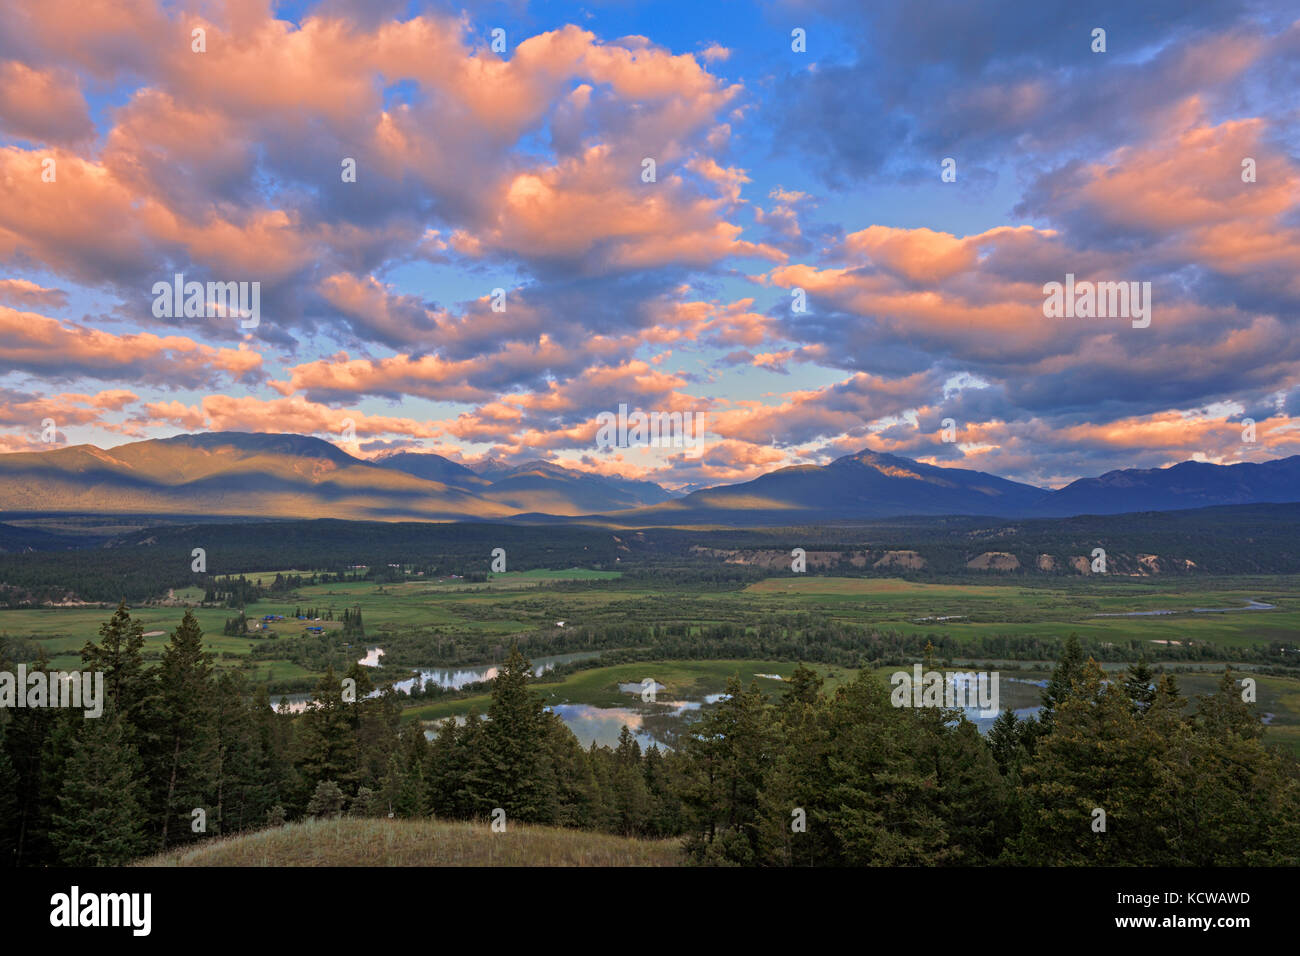 Looking west across the Columbia Valley to the Purcell Mountains at sunrise, Radium, British Columbia, Canada Stock Photo